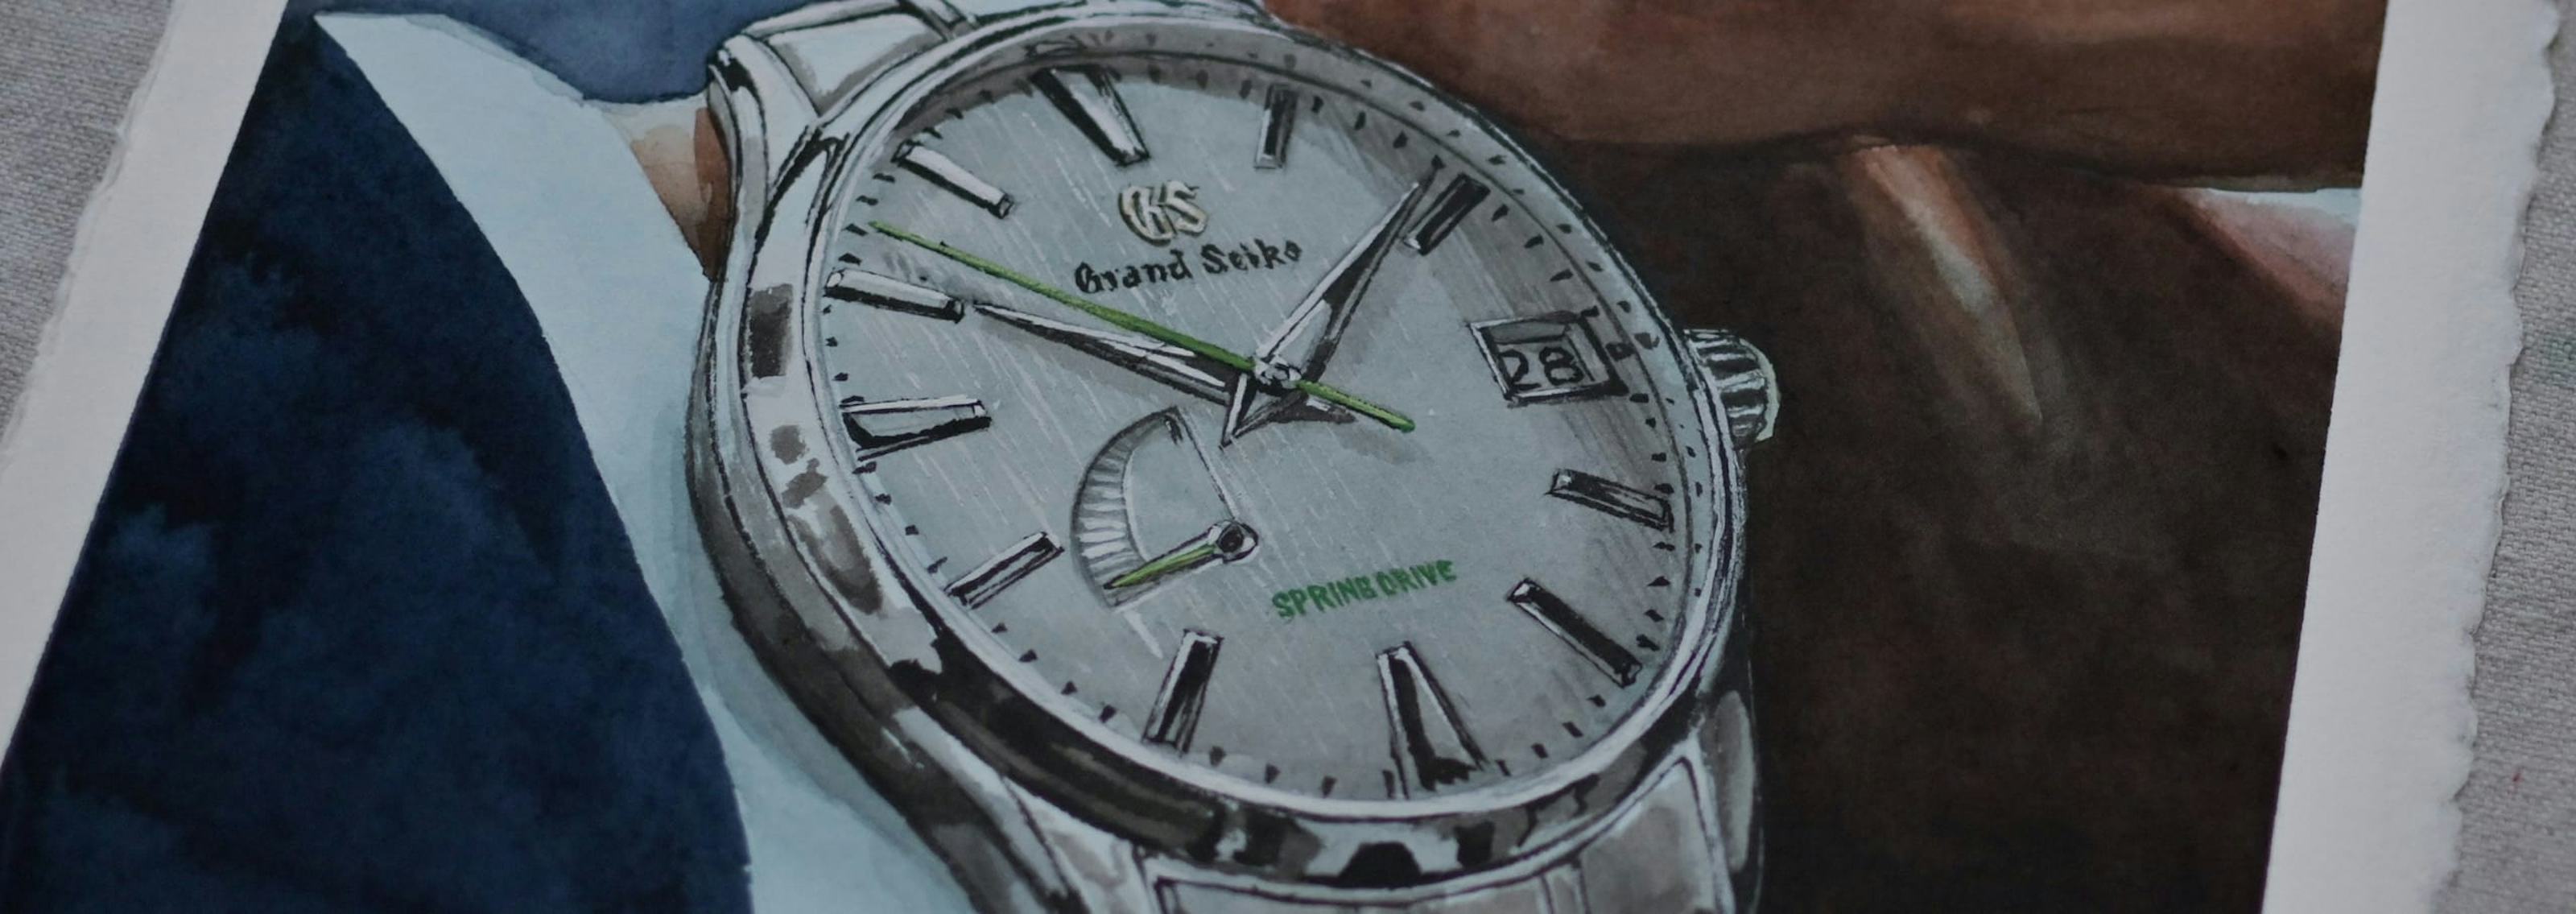 Featured Video: Behind the Scenes with Grand Seiko’s Extraordinary Dials